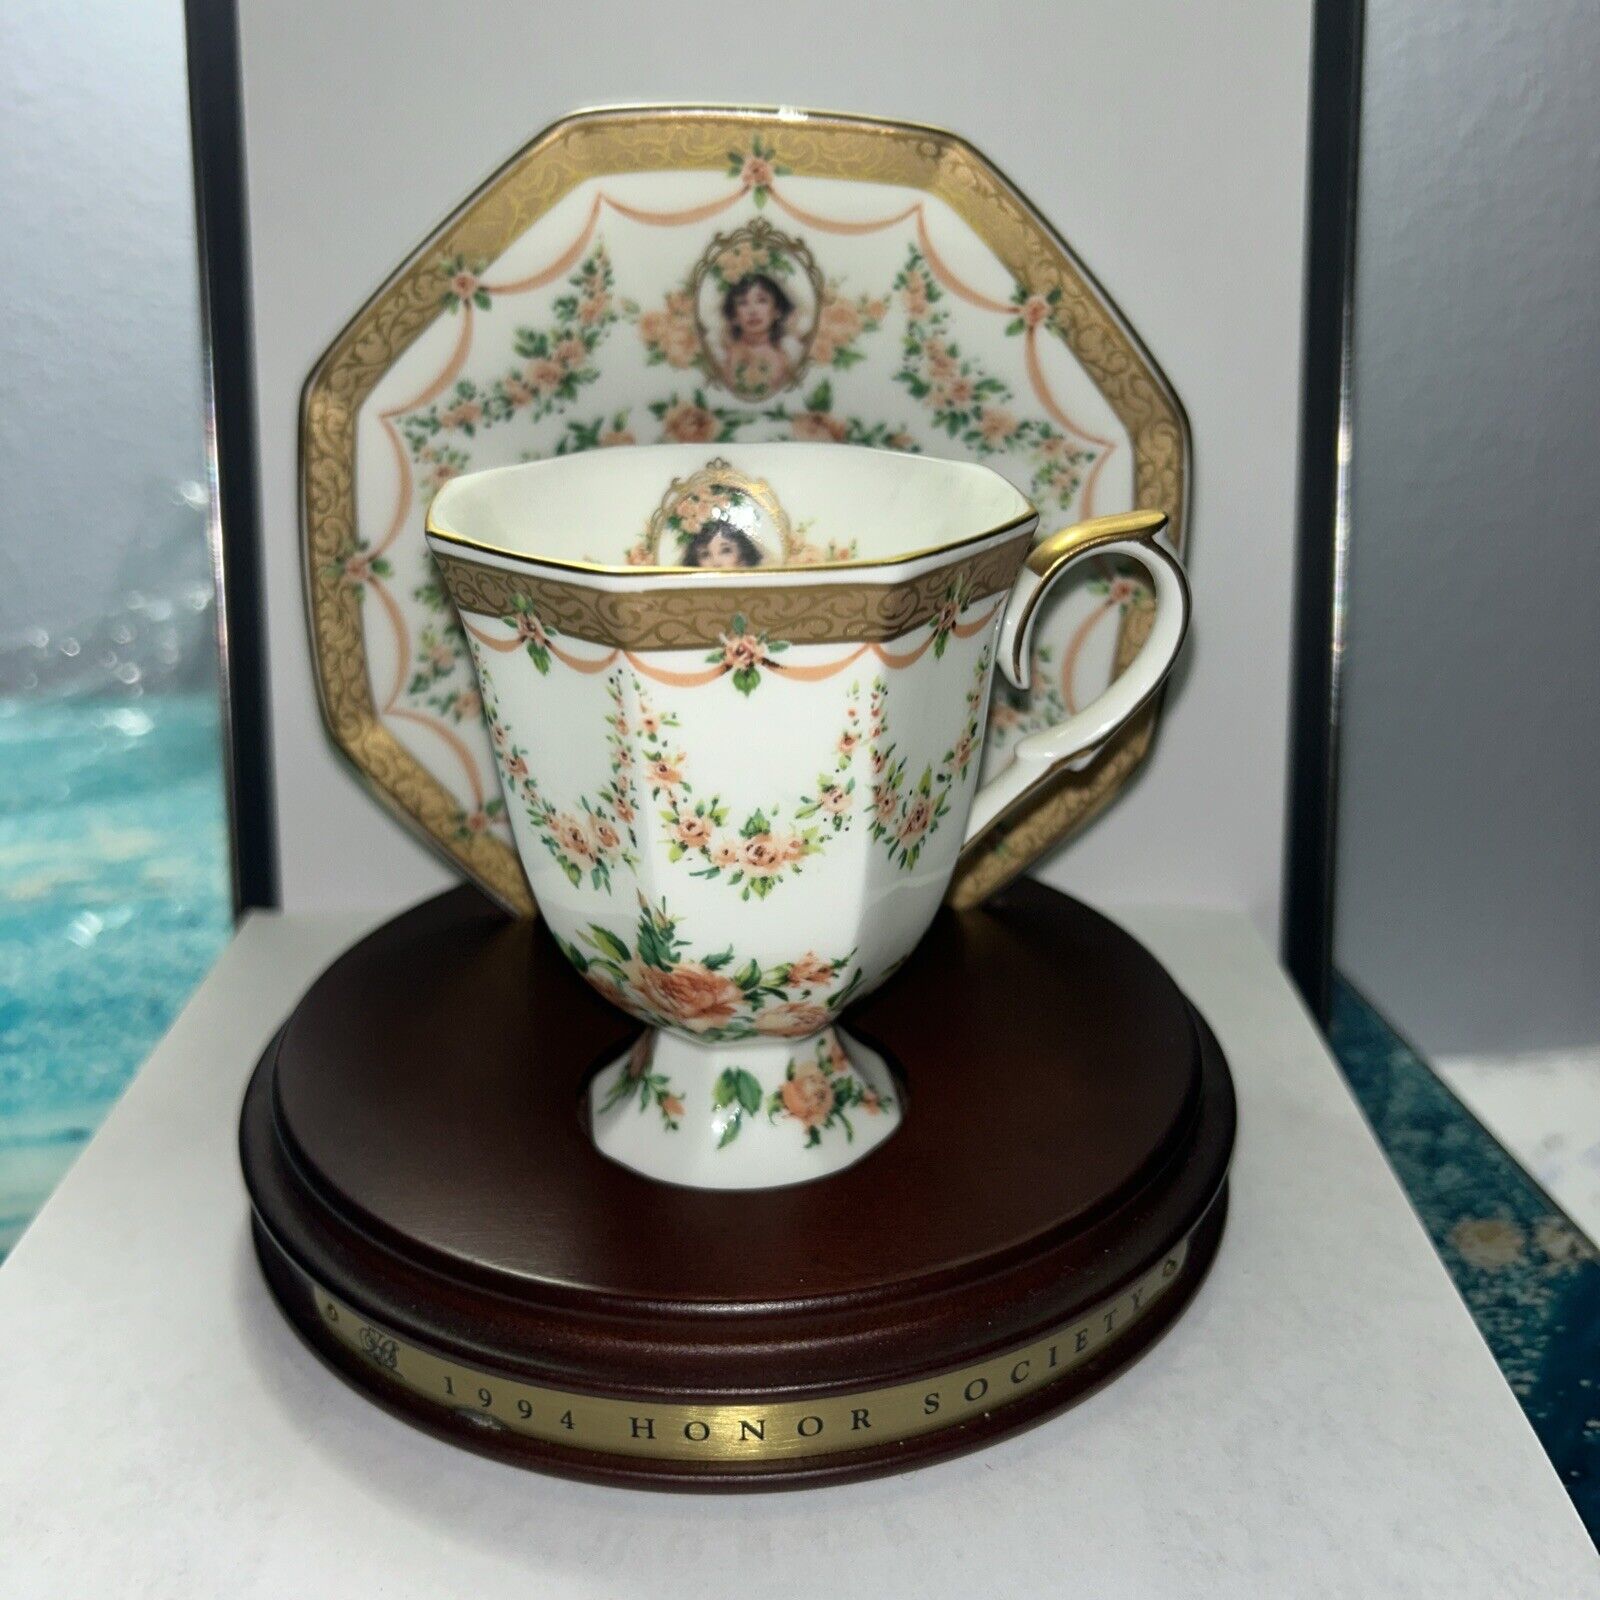 Avon Honor Society Fine China Teacup Saucer & Stand 1994